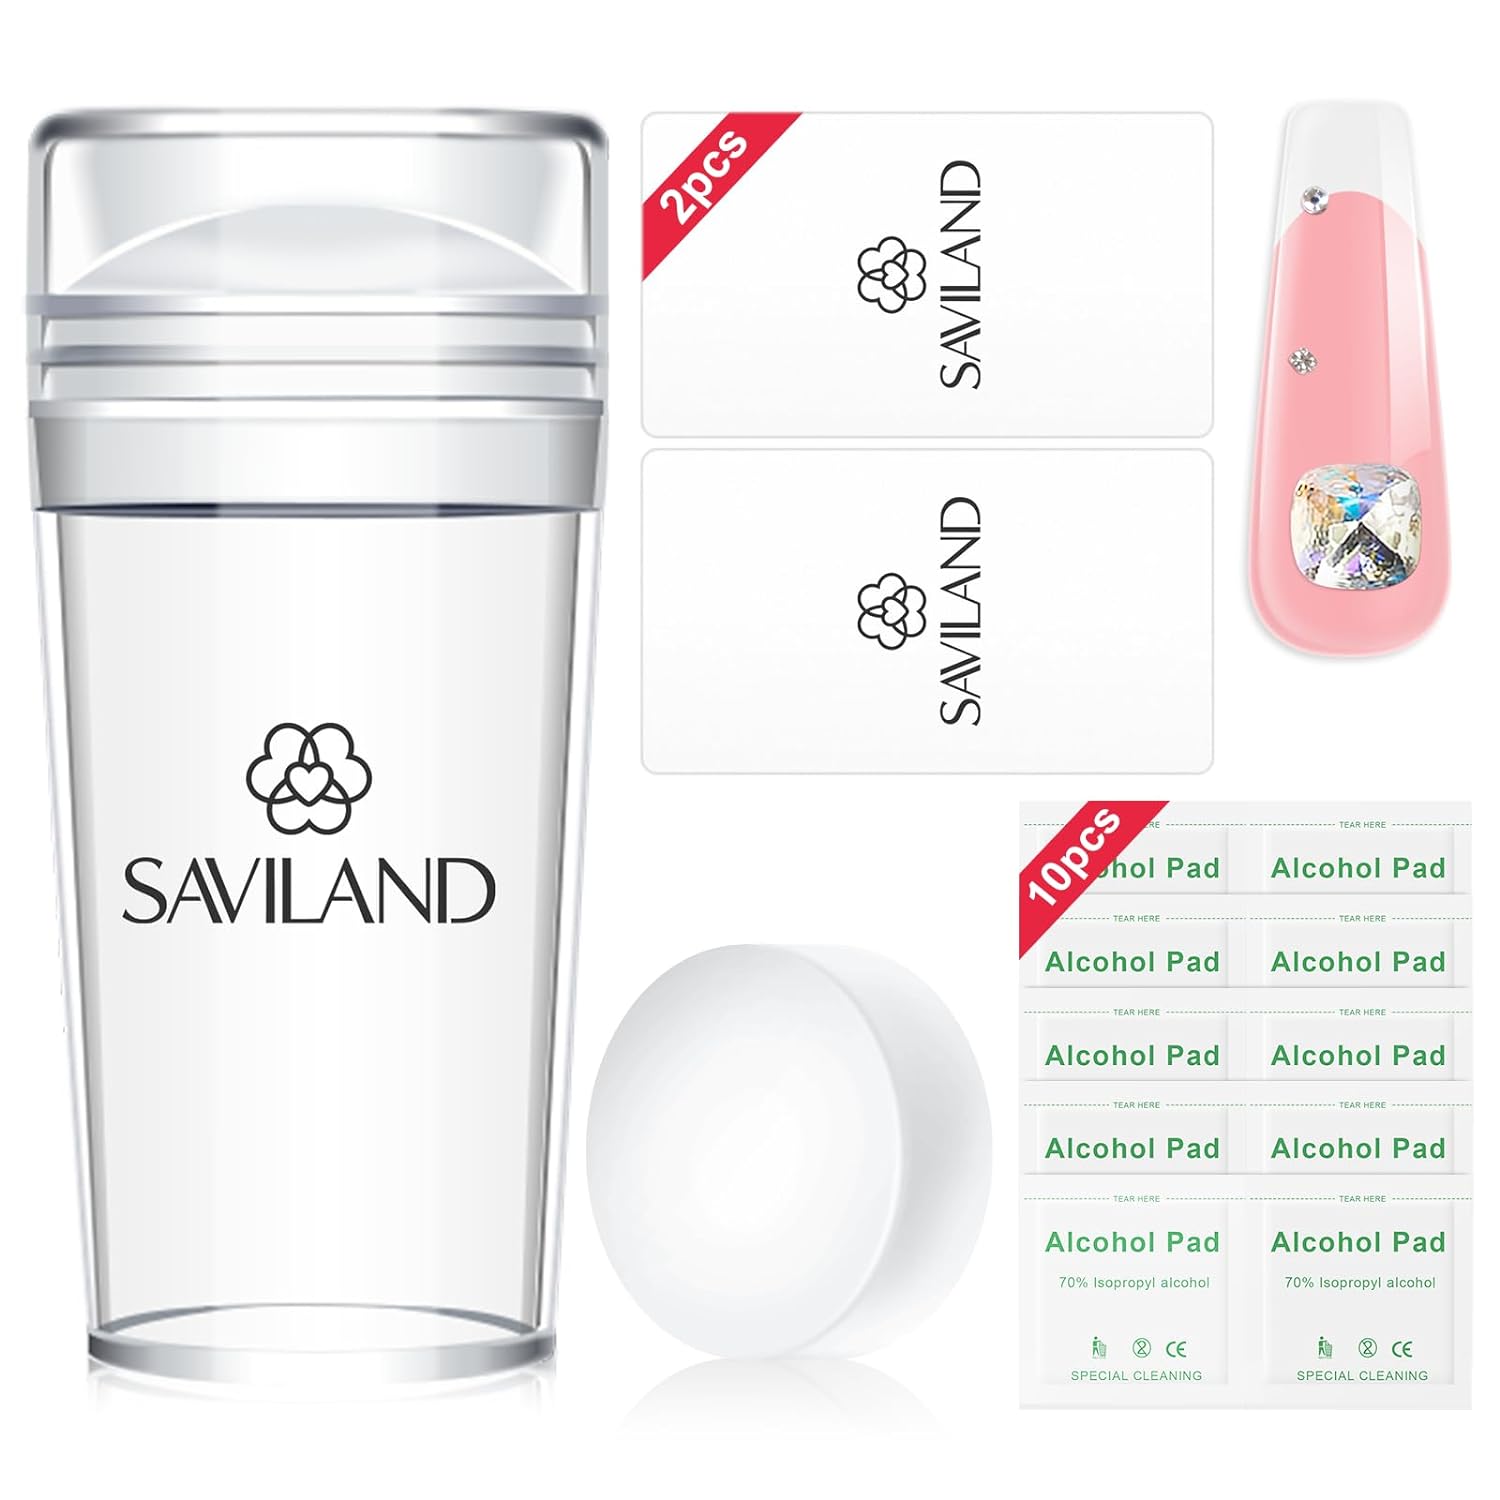 Saviland Nail Stamp Set French Nail Art Stamper Kit with 2 Clear Silicone and 2 Scrapers, Nail Stamp Tool Set Silicone Jelly Nails Tools for Nail Polish Nail Tips French DIY Manicure